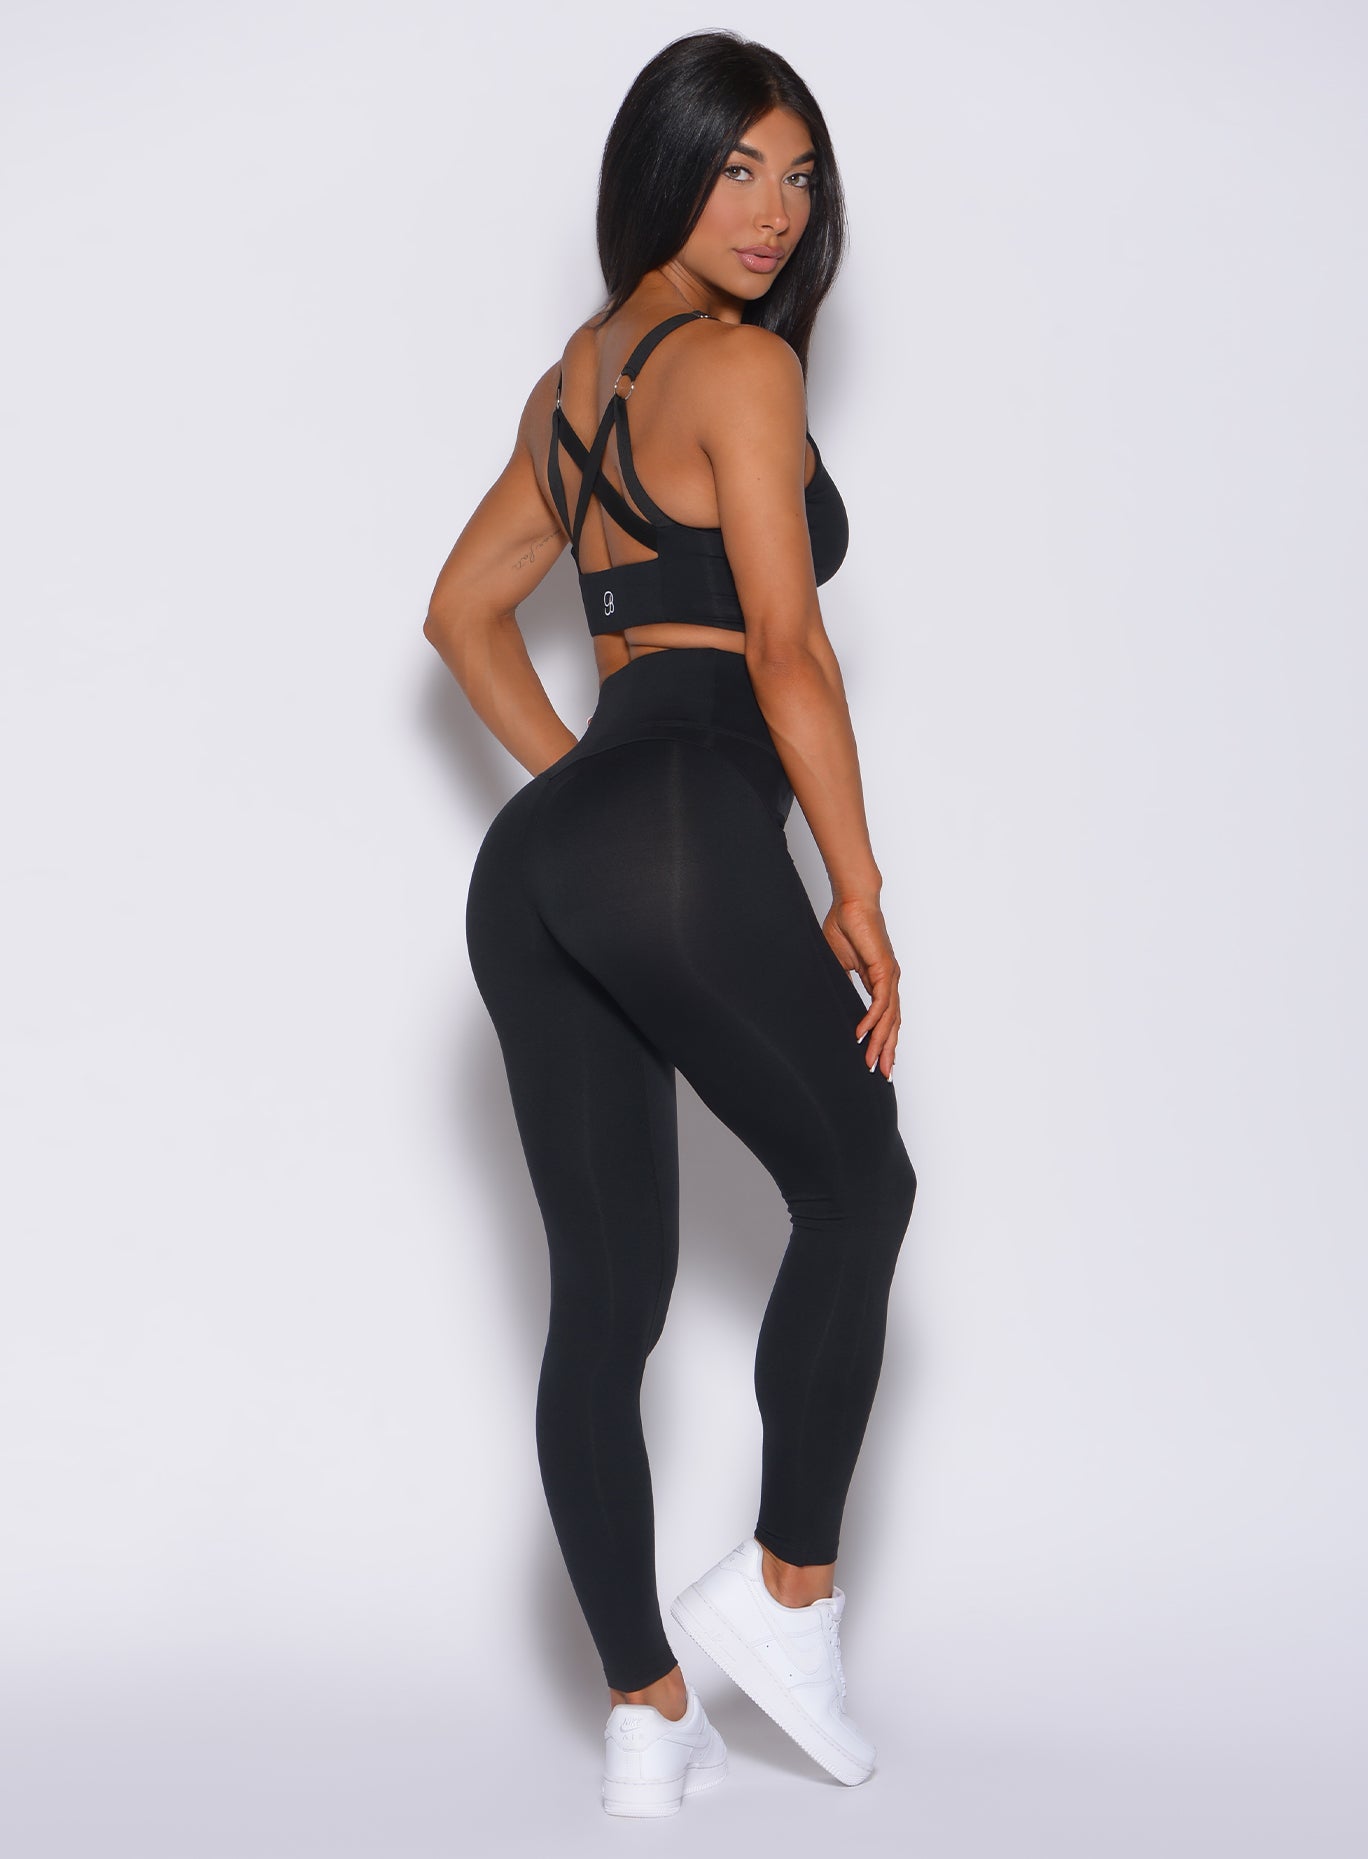 Right side profile view of a model in our black snatched waist leggings and a matching bra